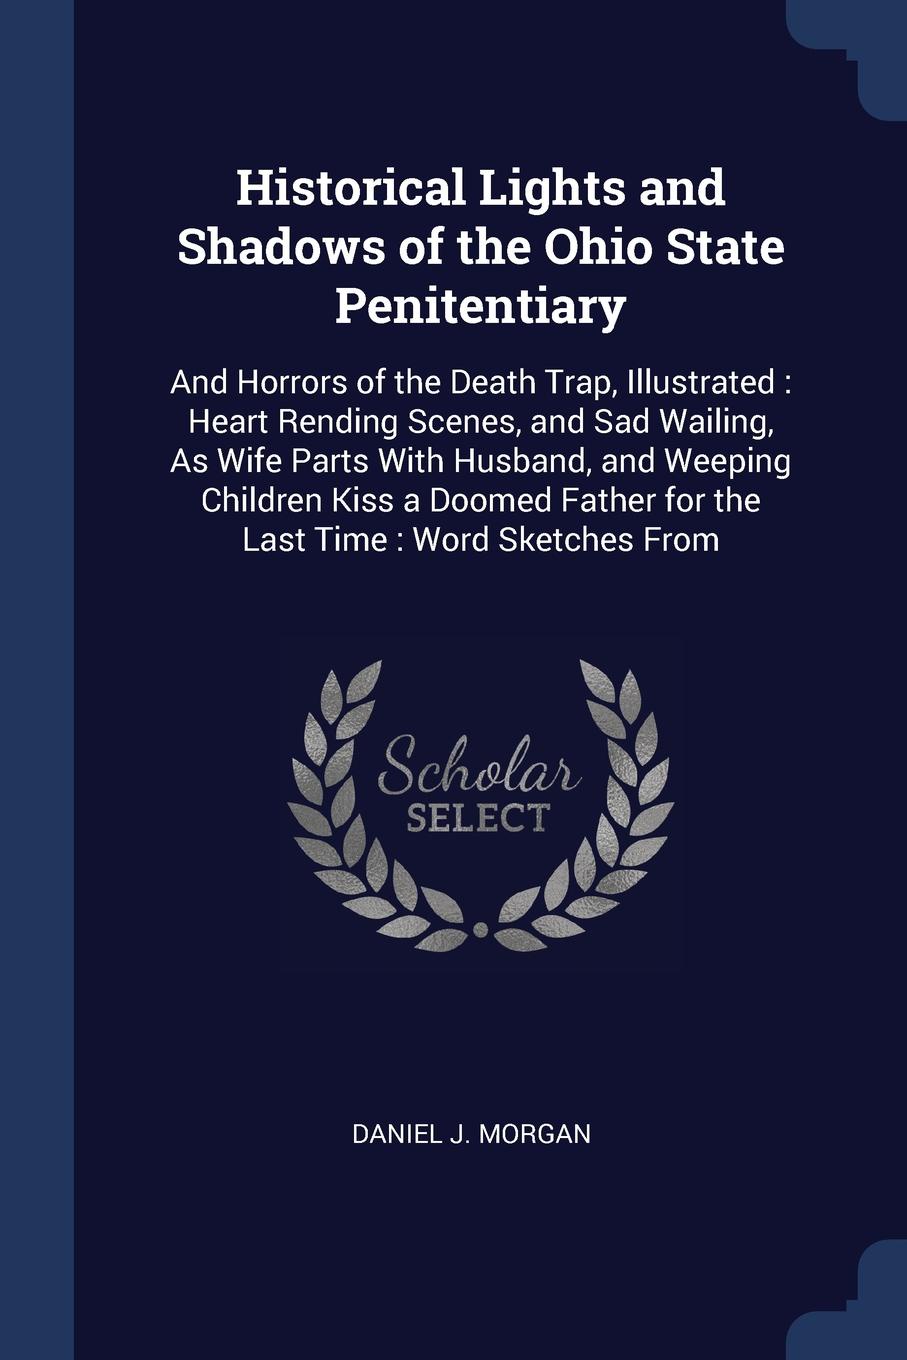 Historical Lights and Shadows of the Ohio State Penitentiary. And Horrors of the Death Trap, Illustrated : Heart Rending Scenes, and Sad Wailing, As Wife Parts With Husband, and Weeping Children Kiss a Doomed Father for the Last Time : Word Sketch...